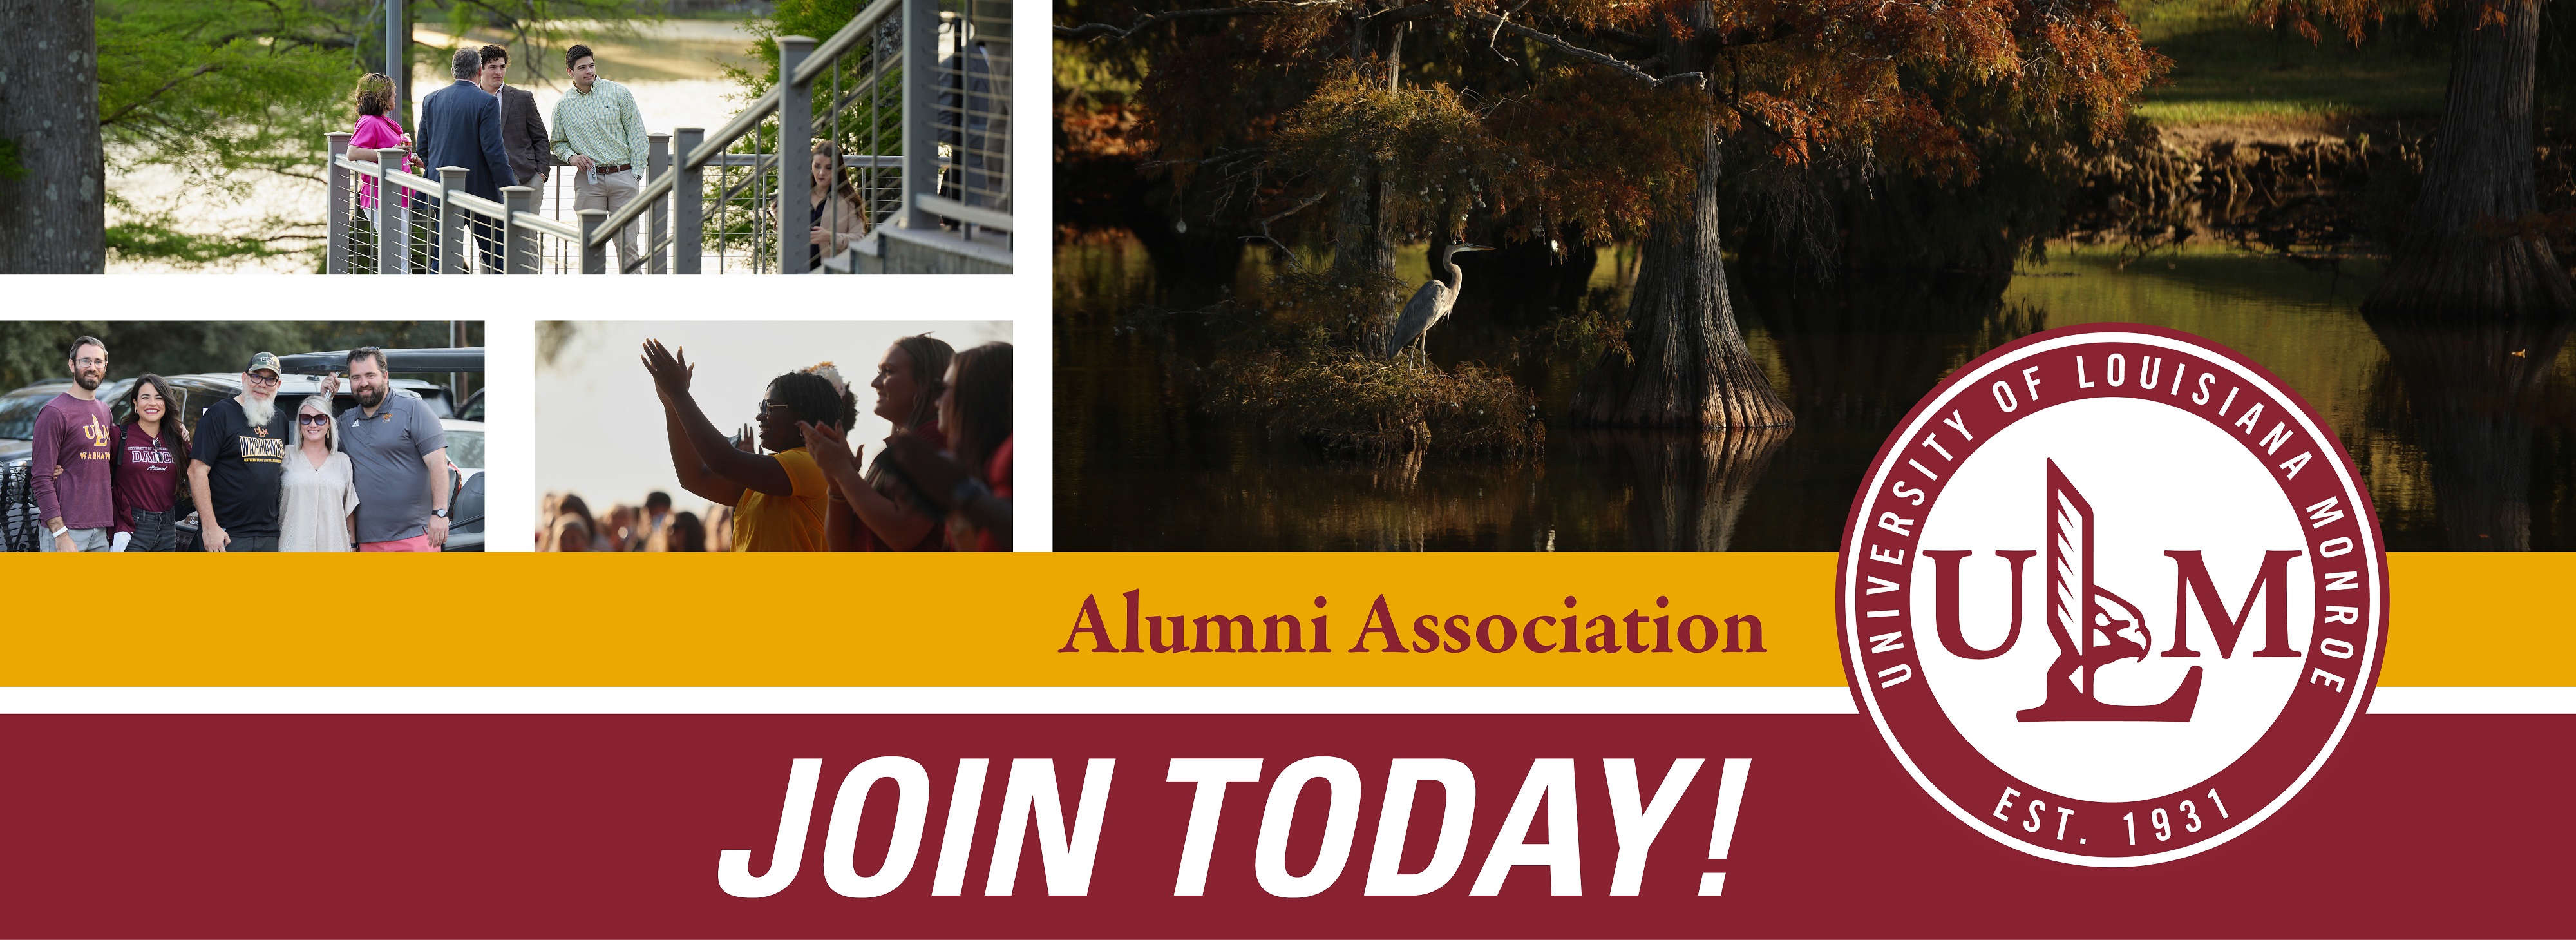 ULM Alumni association logo with text that reads, "JOIN TODAY!" and a collage of pictures from around campus.